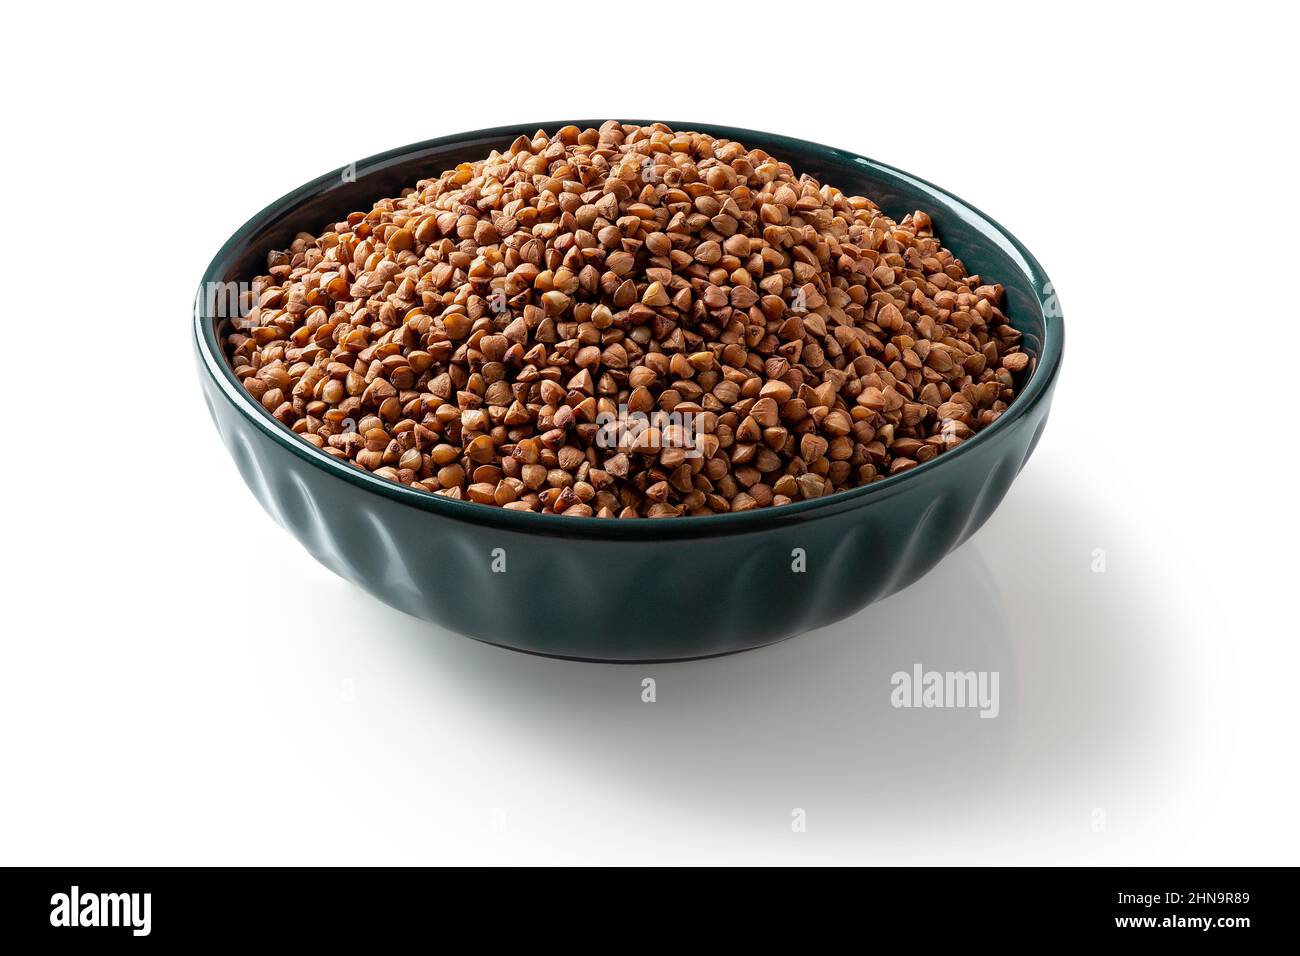 Raw wholegrain buckwheat groats in a blue bowl isolated on a white background. Roasted organic buckwheat grains for gluten free diet. Vegetarian food. Stock Photo